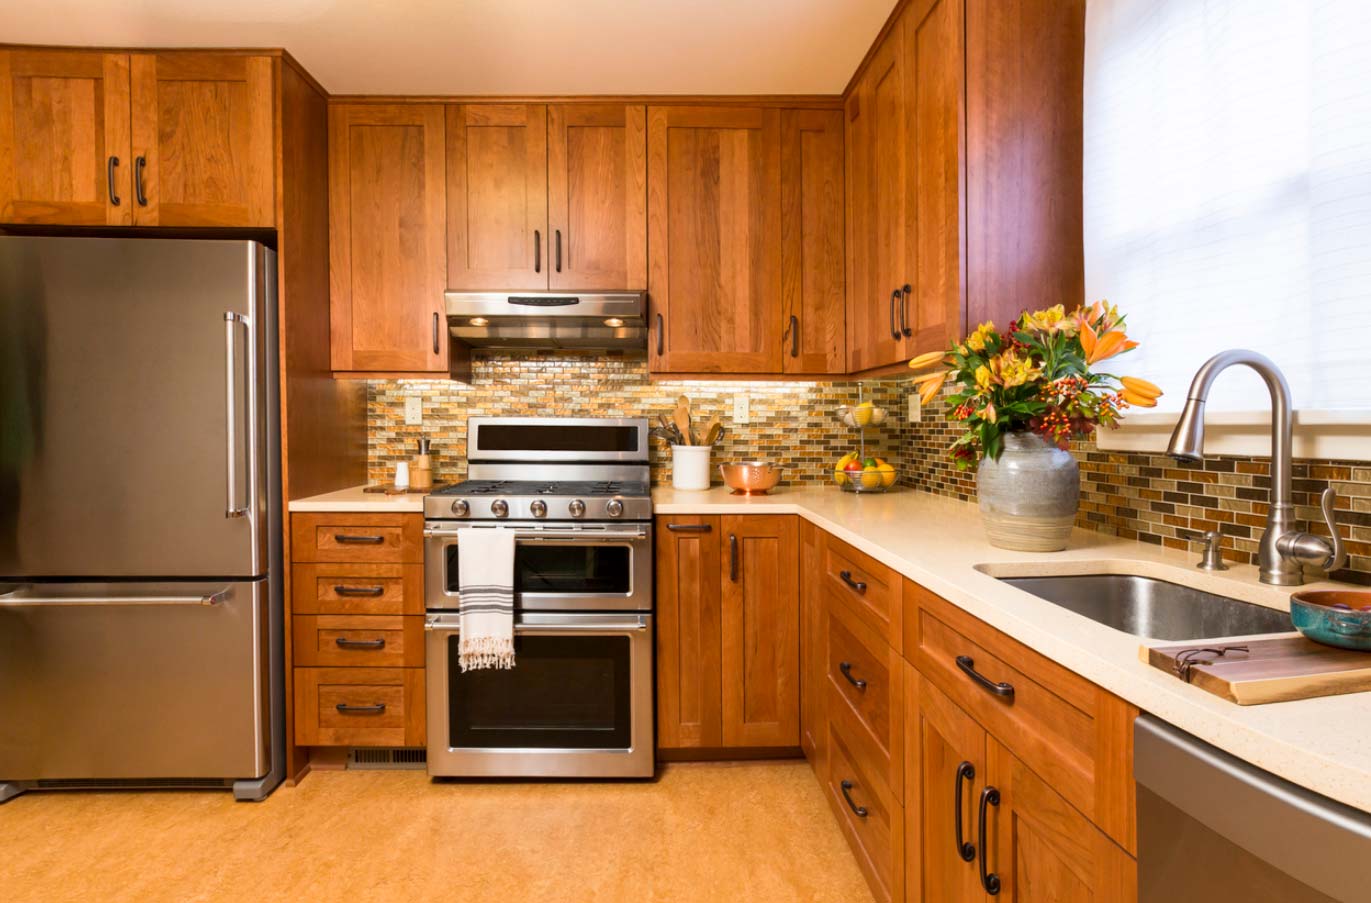 Should Your Flooring Match Your Cabinets? - Cabinet Now